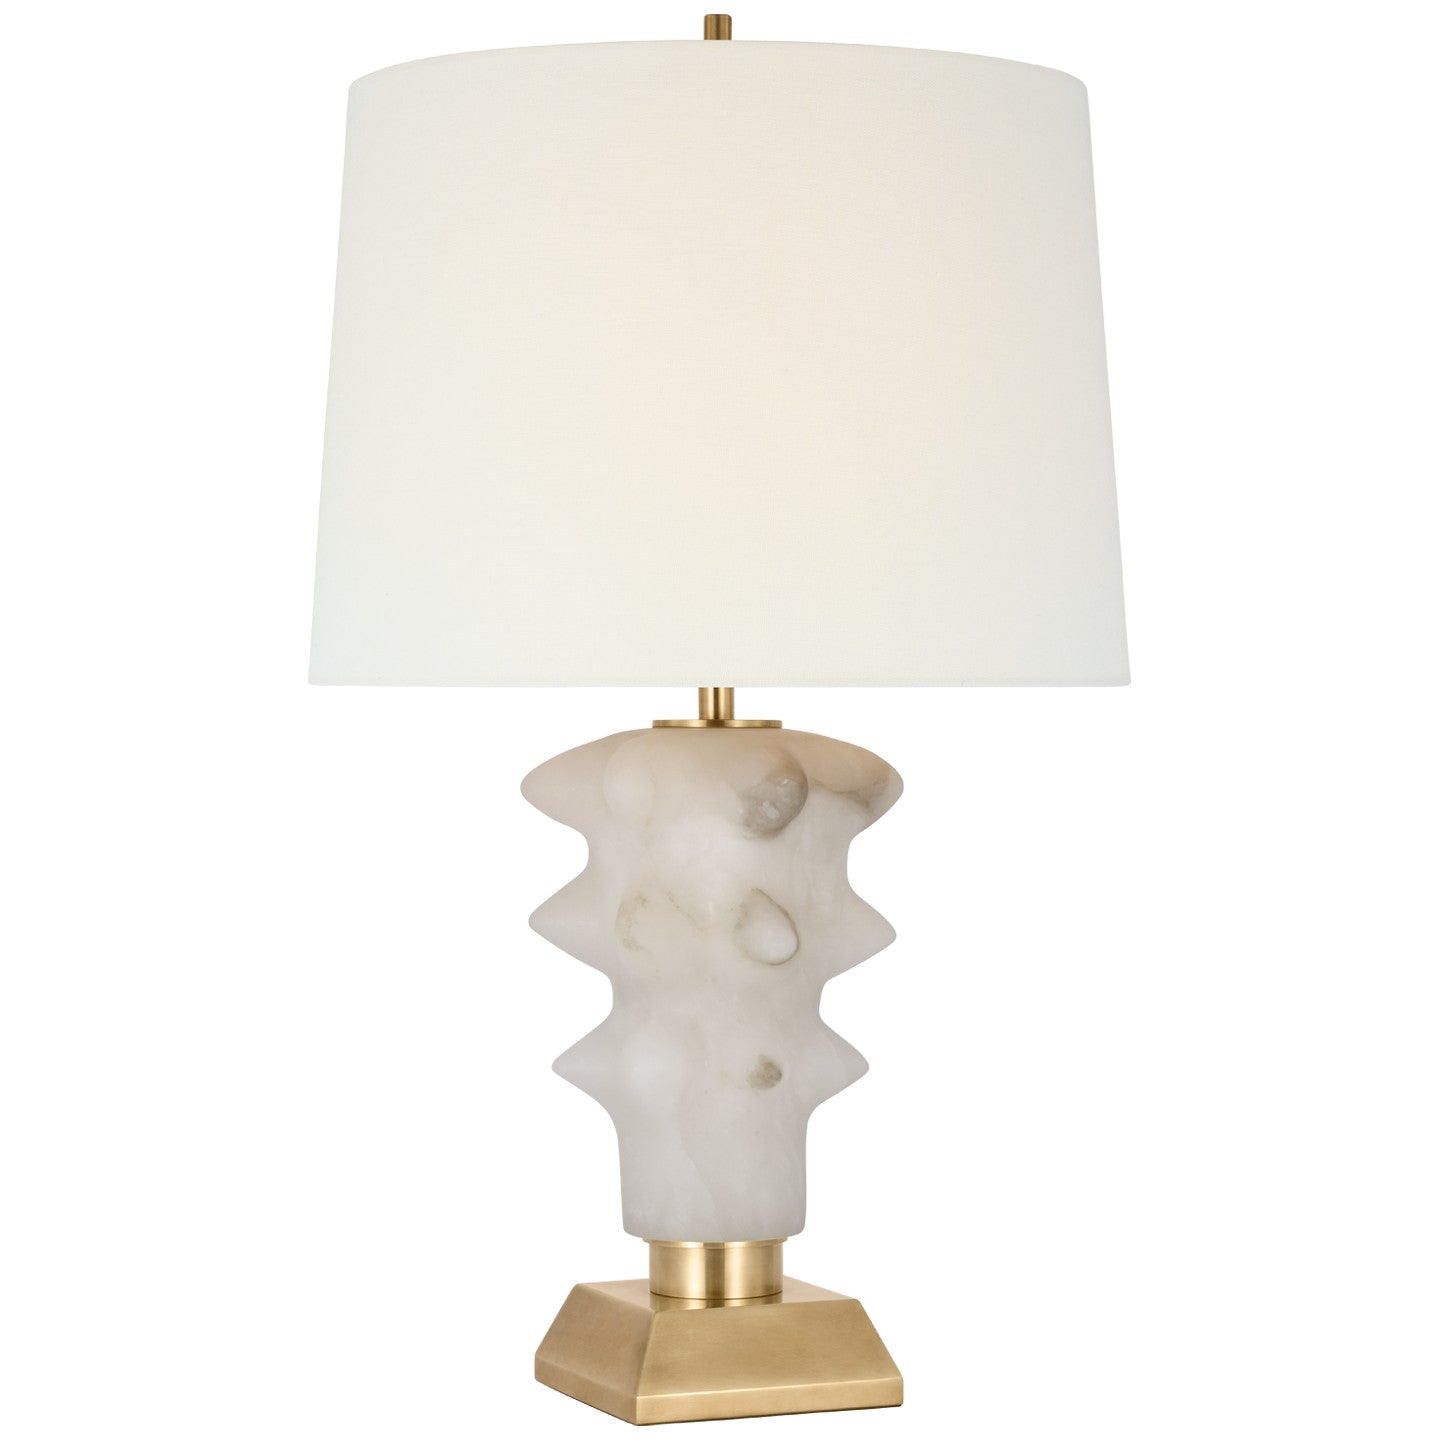 Visual Comfort Signature - TOB 3552ALB/HAB-L - LED Table Lamp - Luxor - Alabaster and Hand-Rubbed Antique Brass